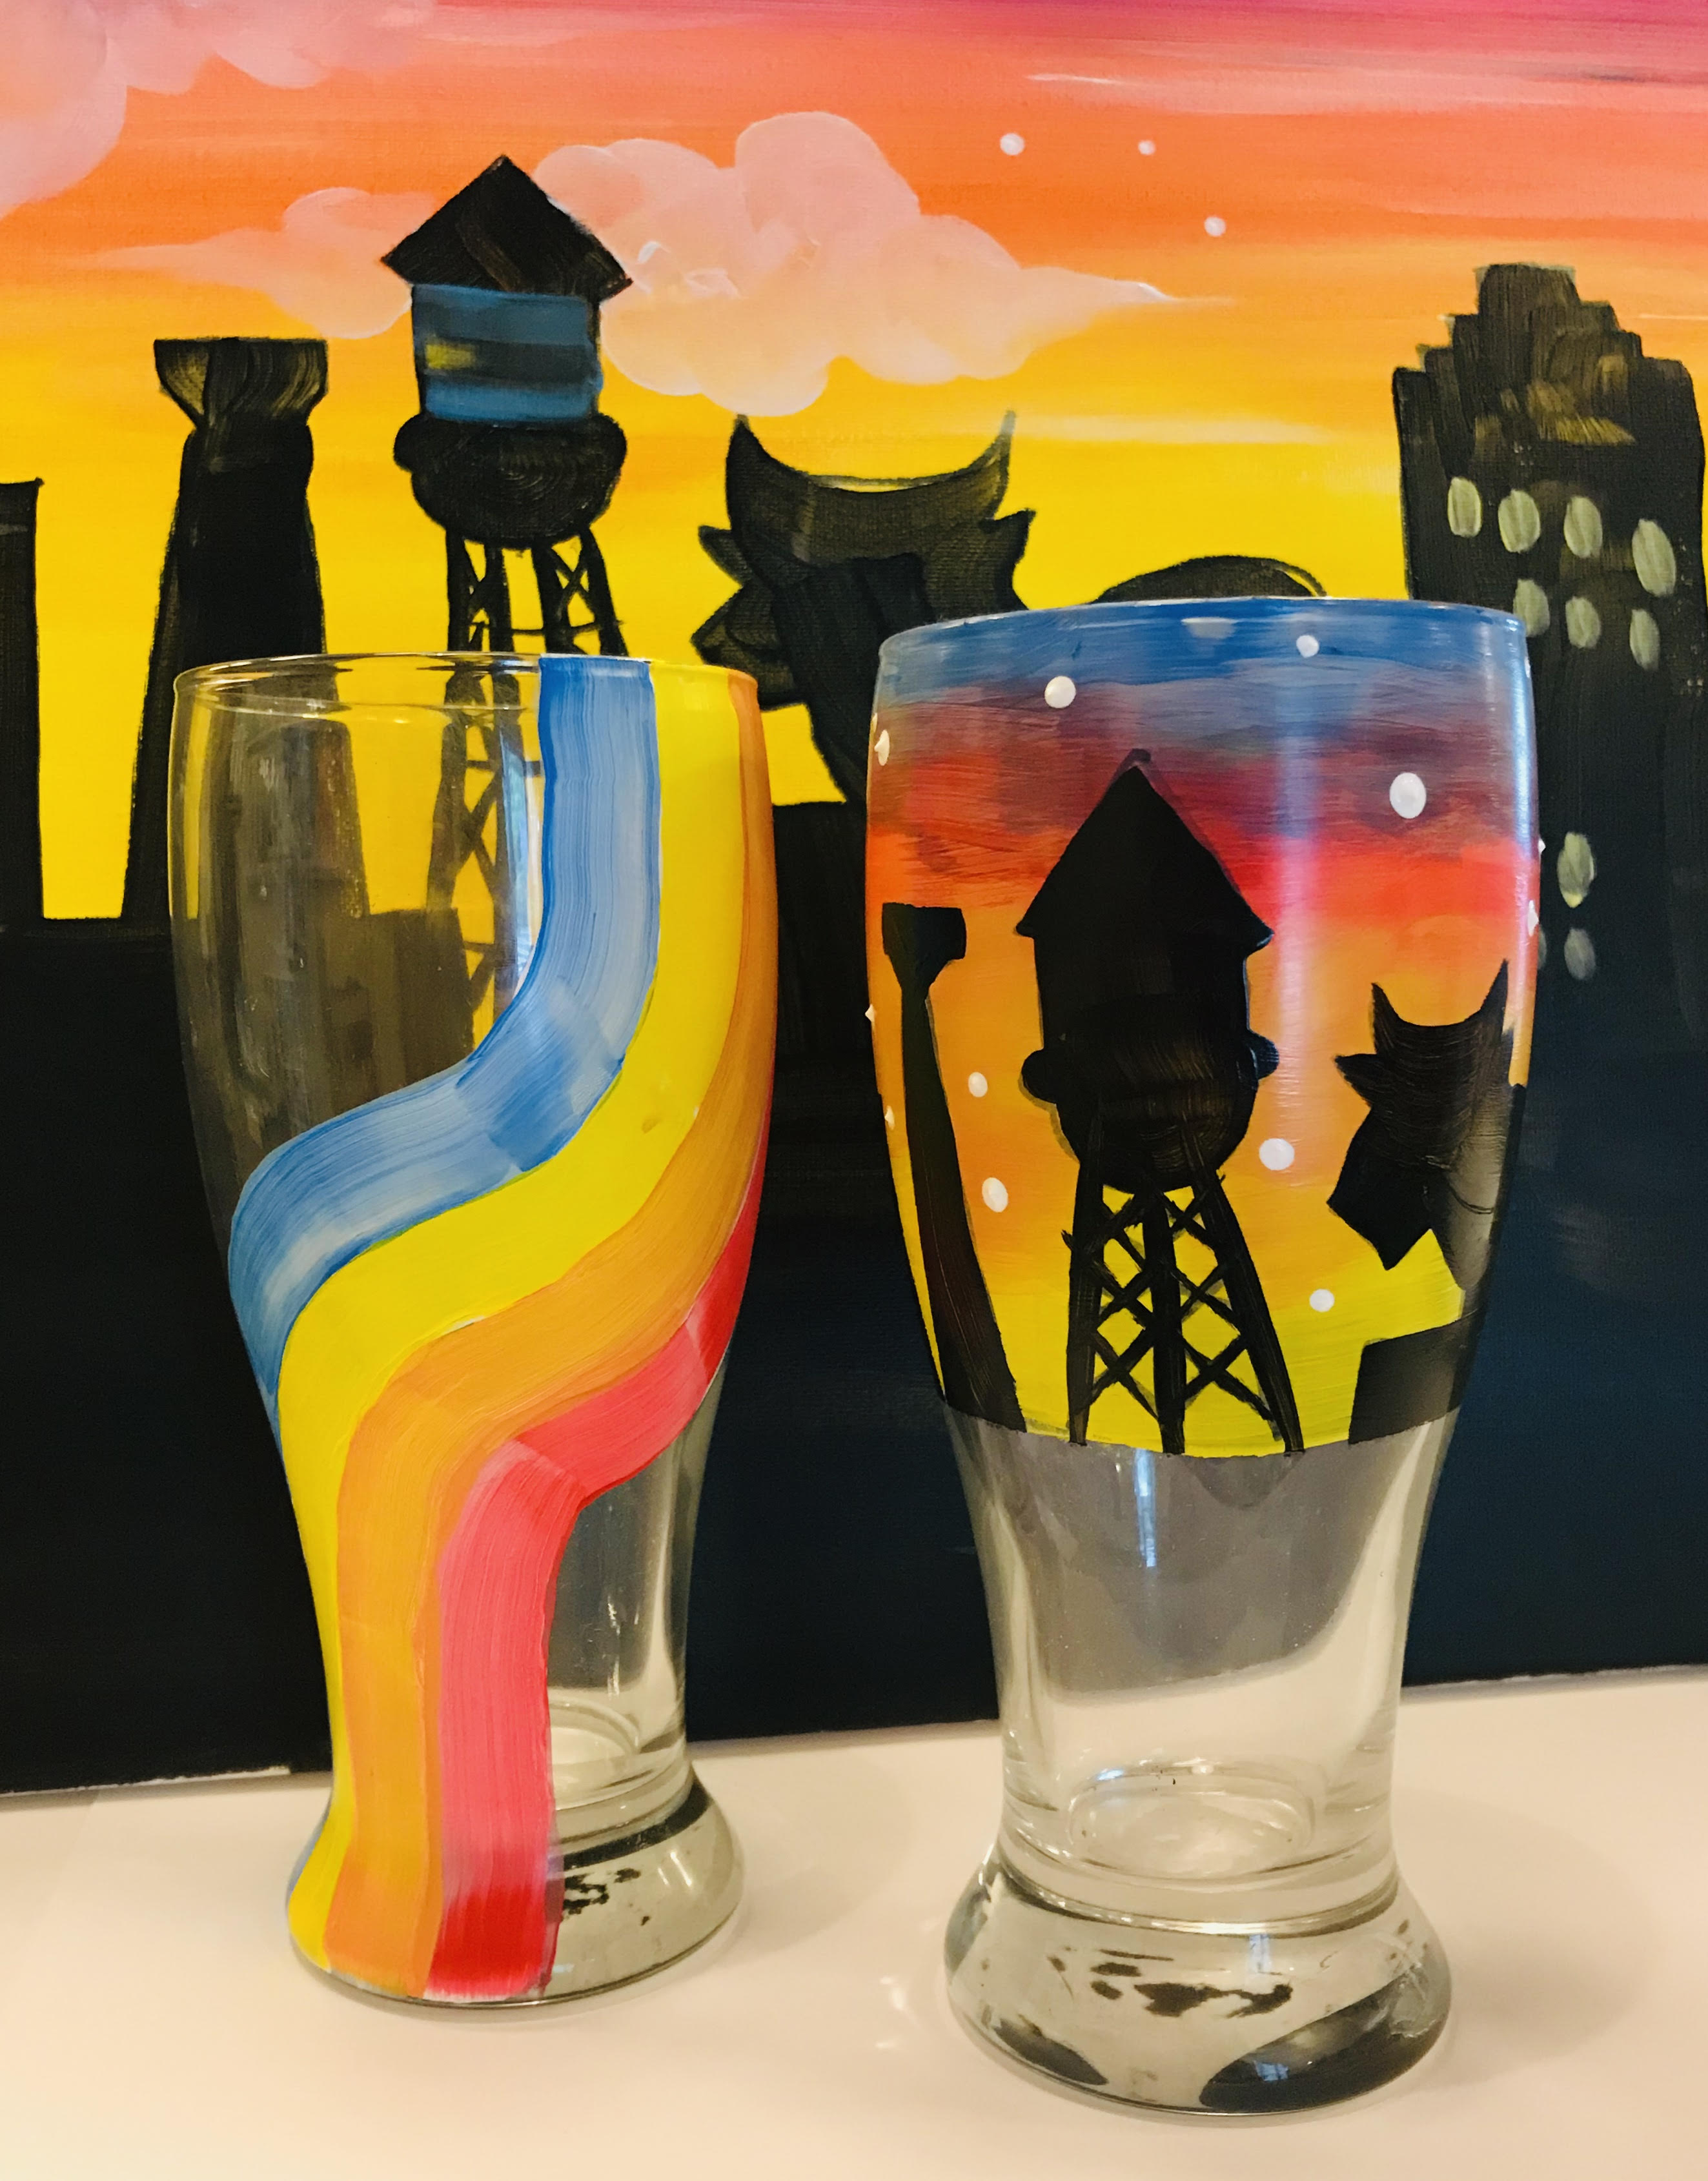 Paint 2 Durham beer glasses at Hi-Wire Brewing